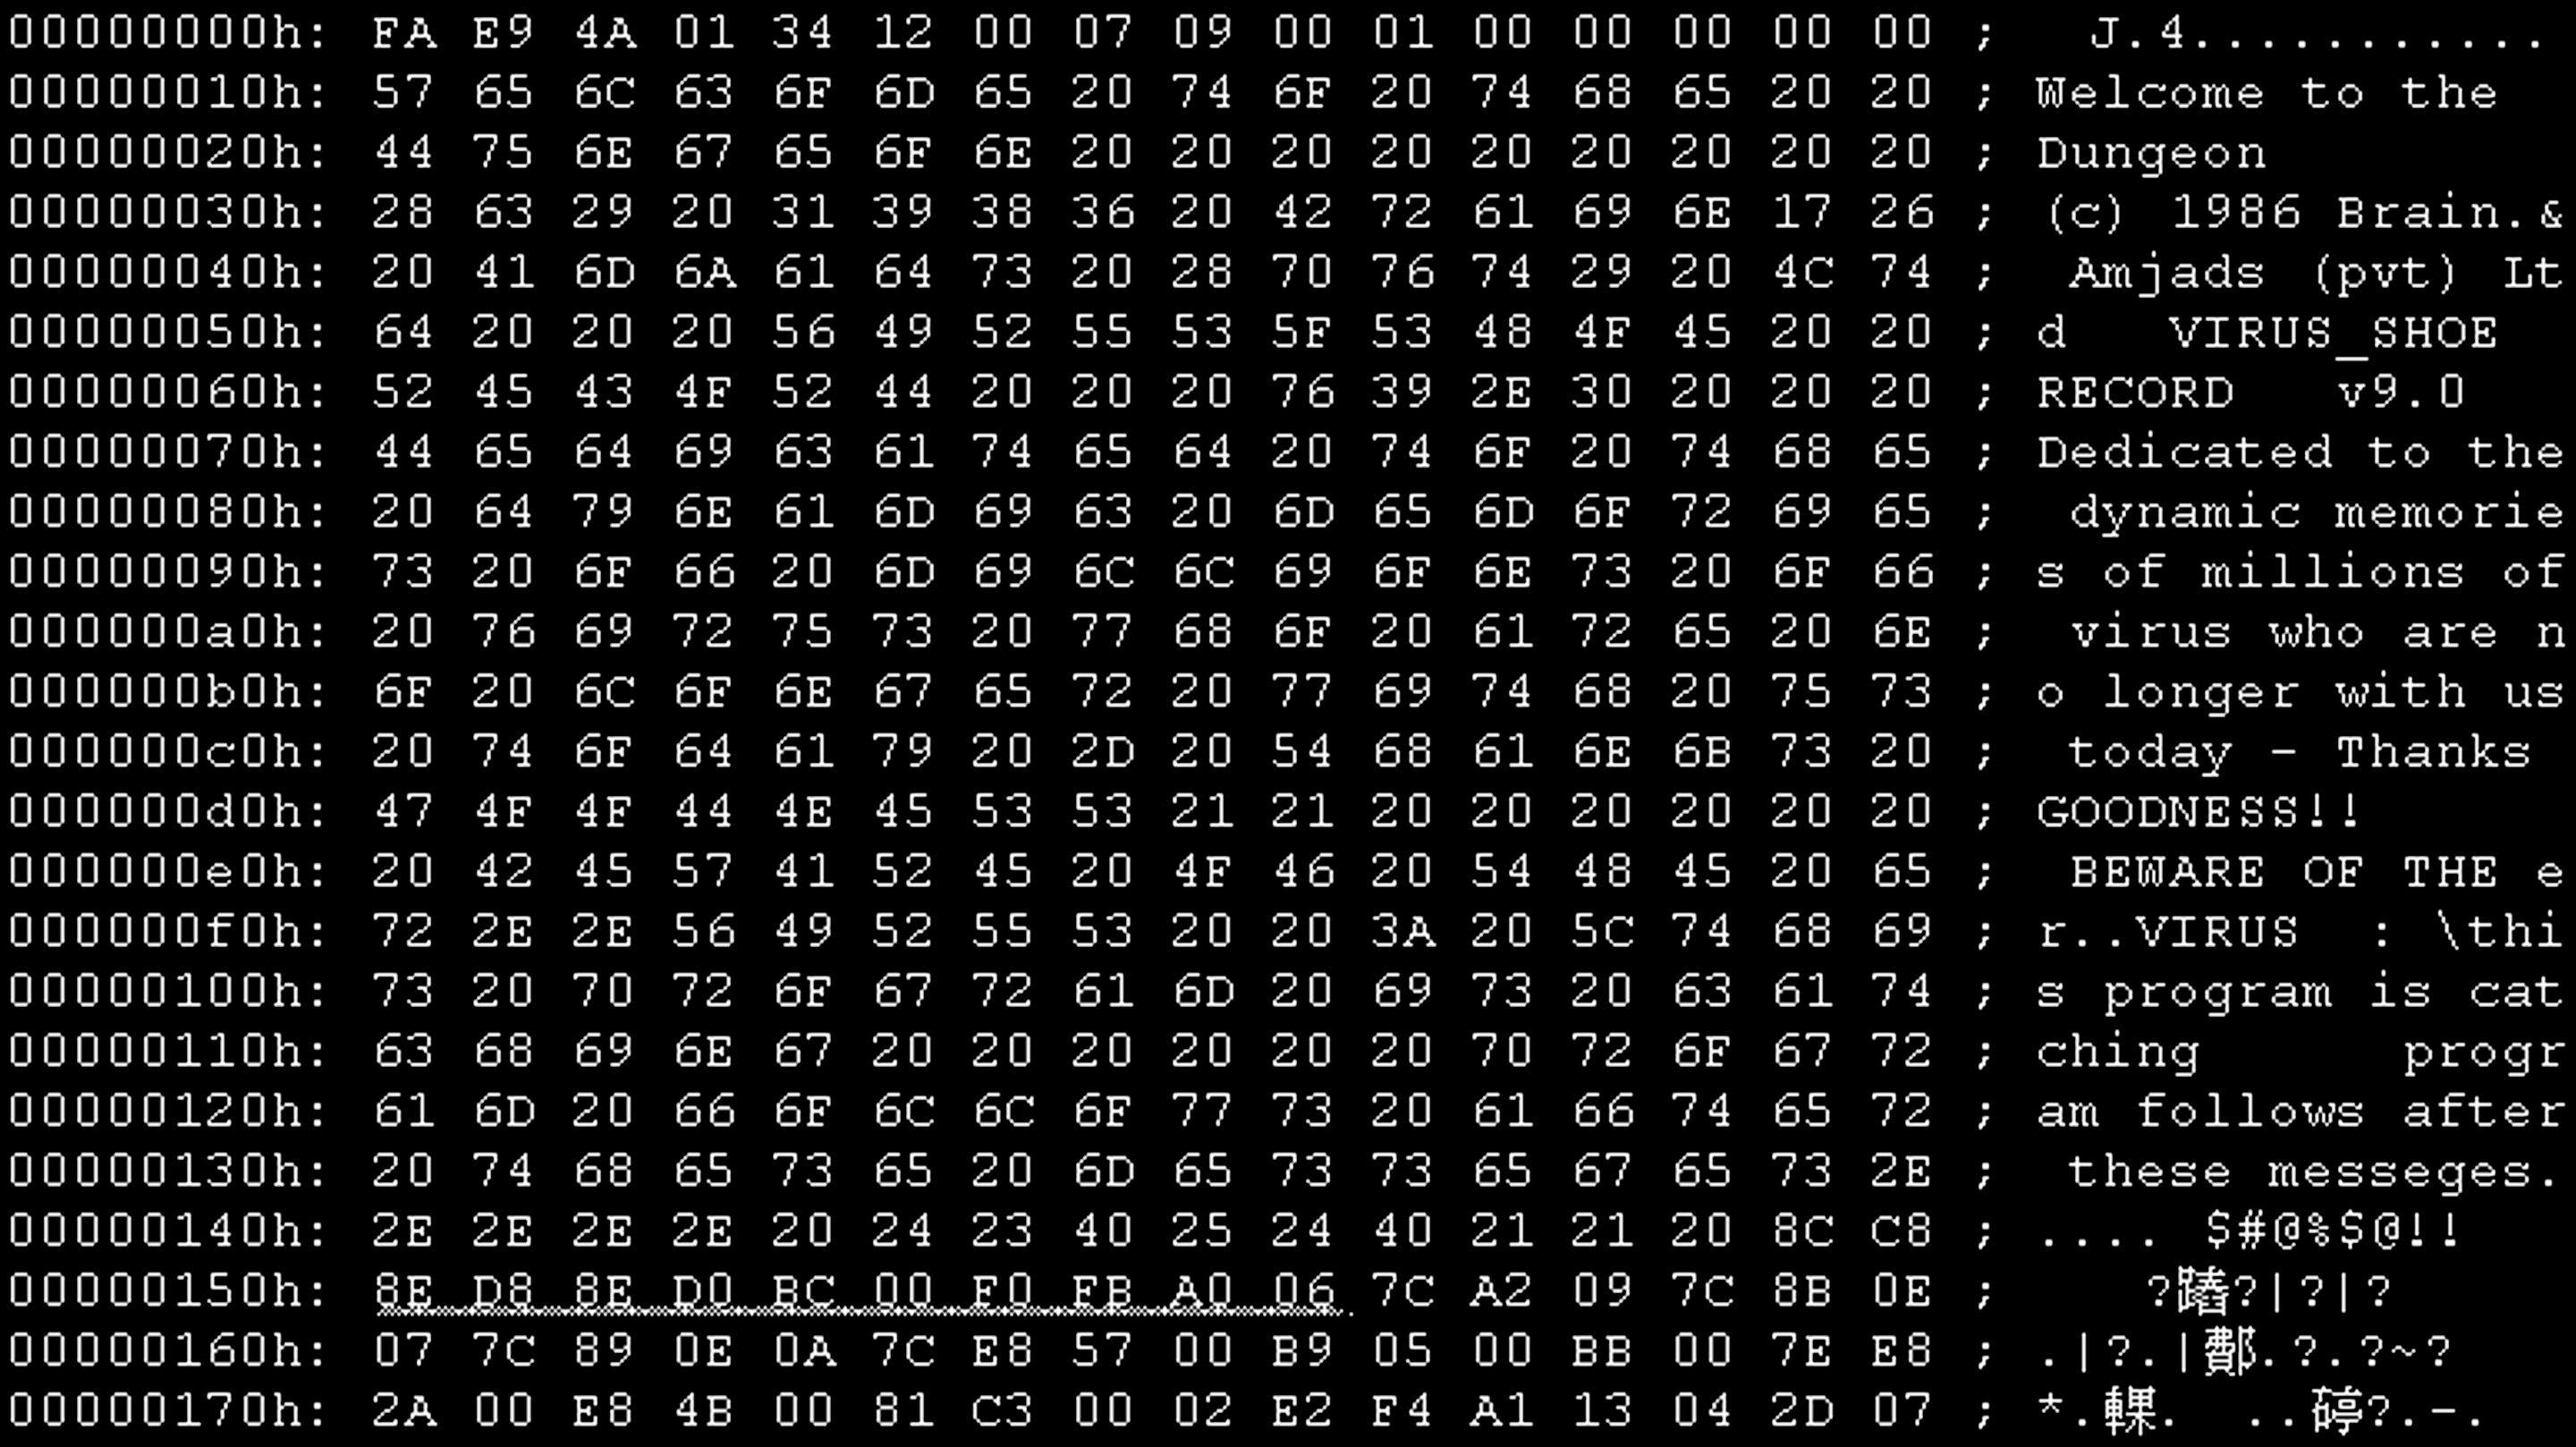 BRAIN, the first DOS computer virus in history. Image: screenshot 